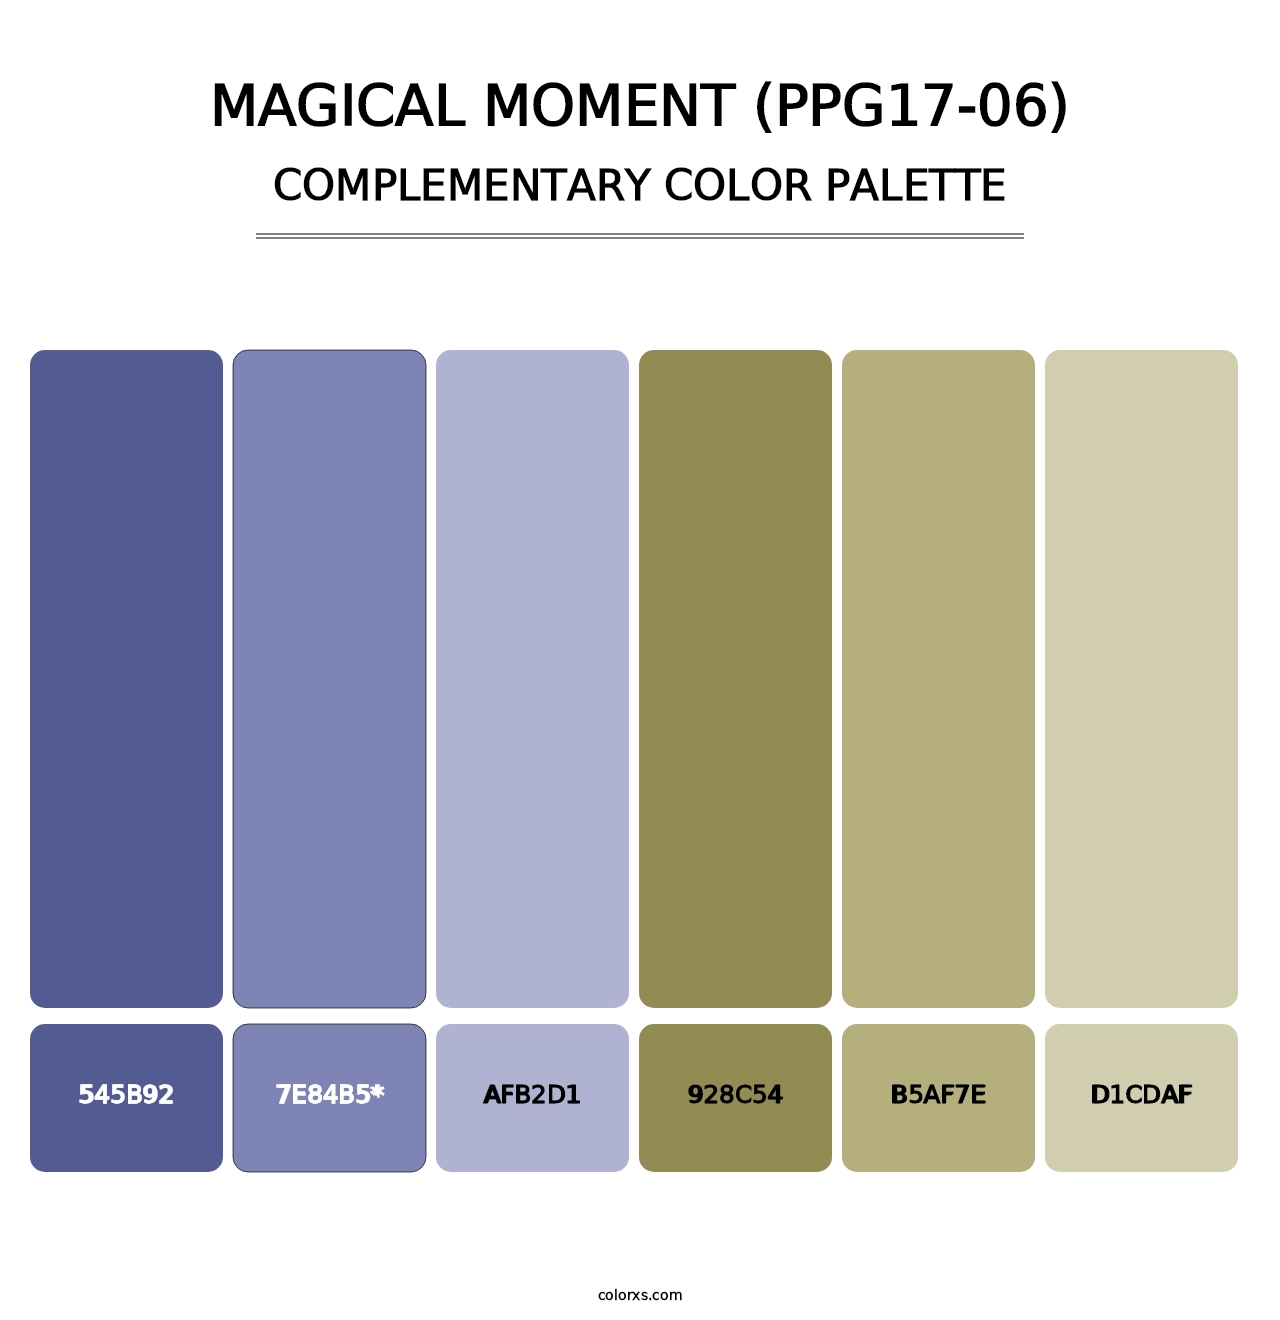 Magical Moment (PPG17-06) - Complementary Color Palette